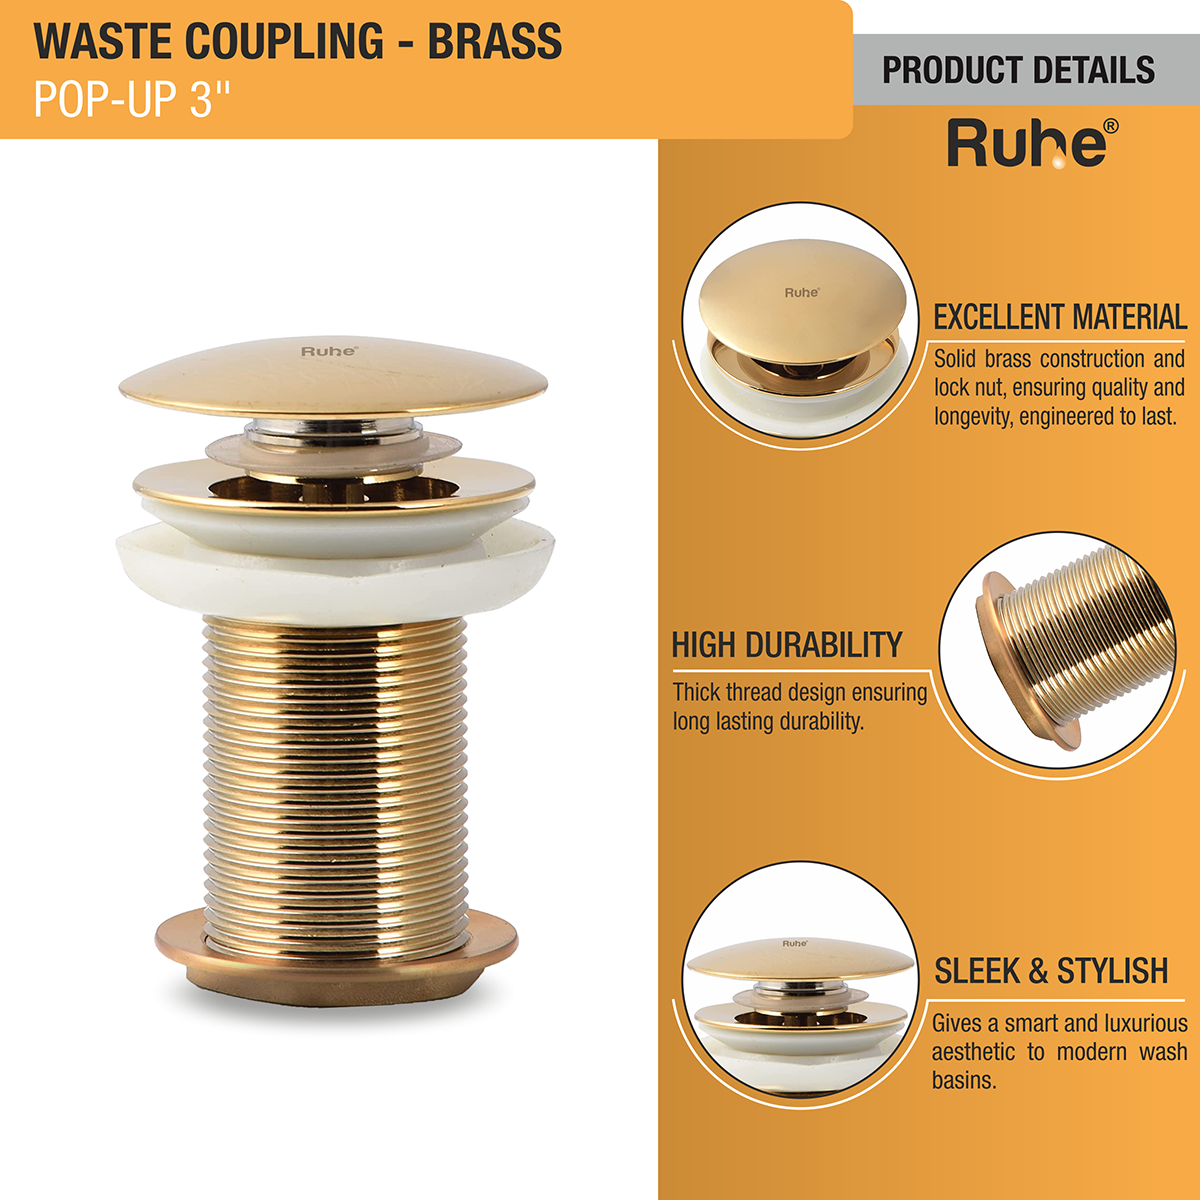 Pop-up Waste Coupling in Yellow Gold PVD Coating (3 Inches) product details